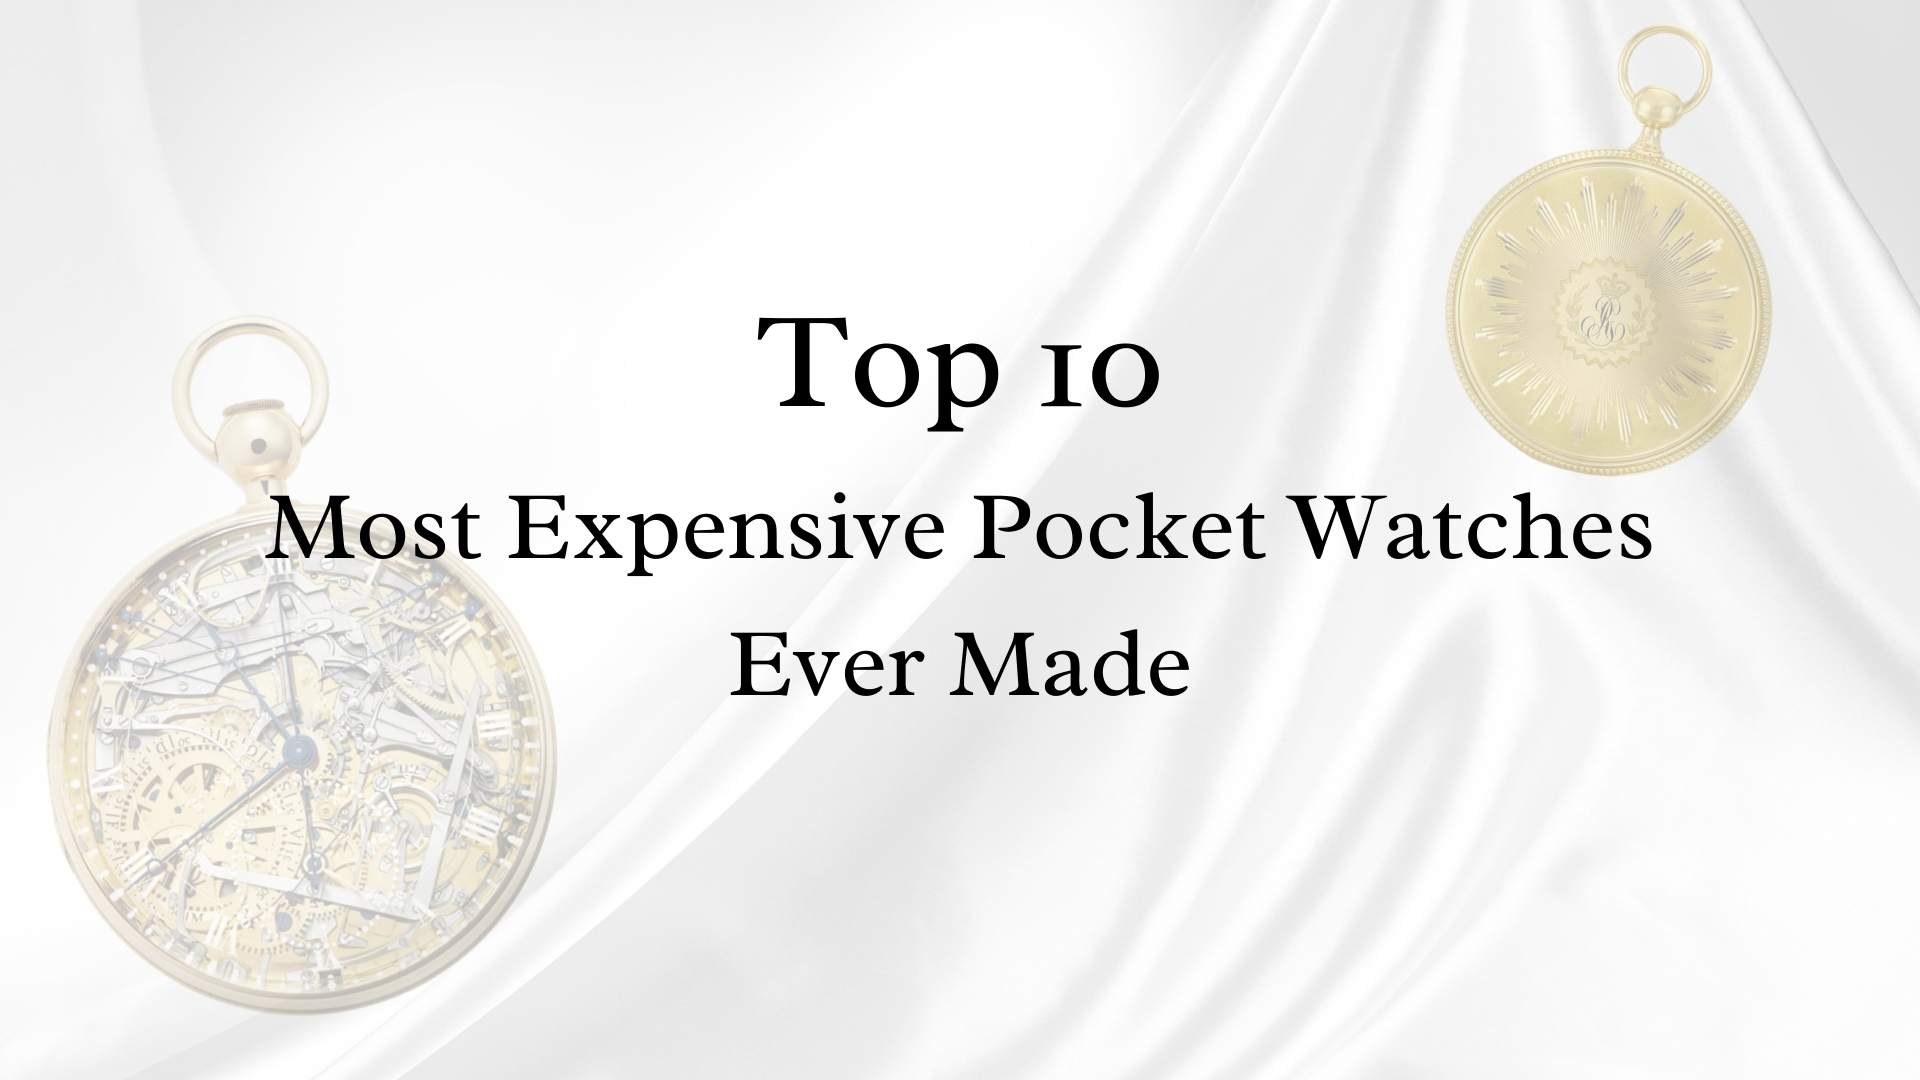 Top 10 Most Expensive Pocket Watches Ever Made